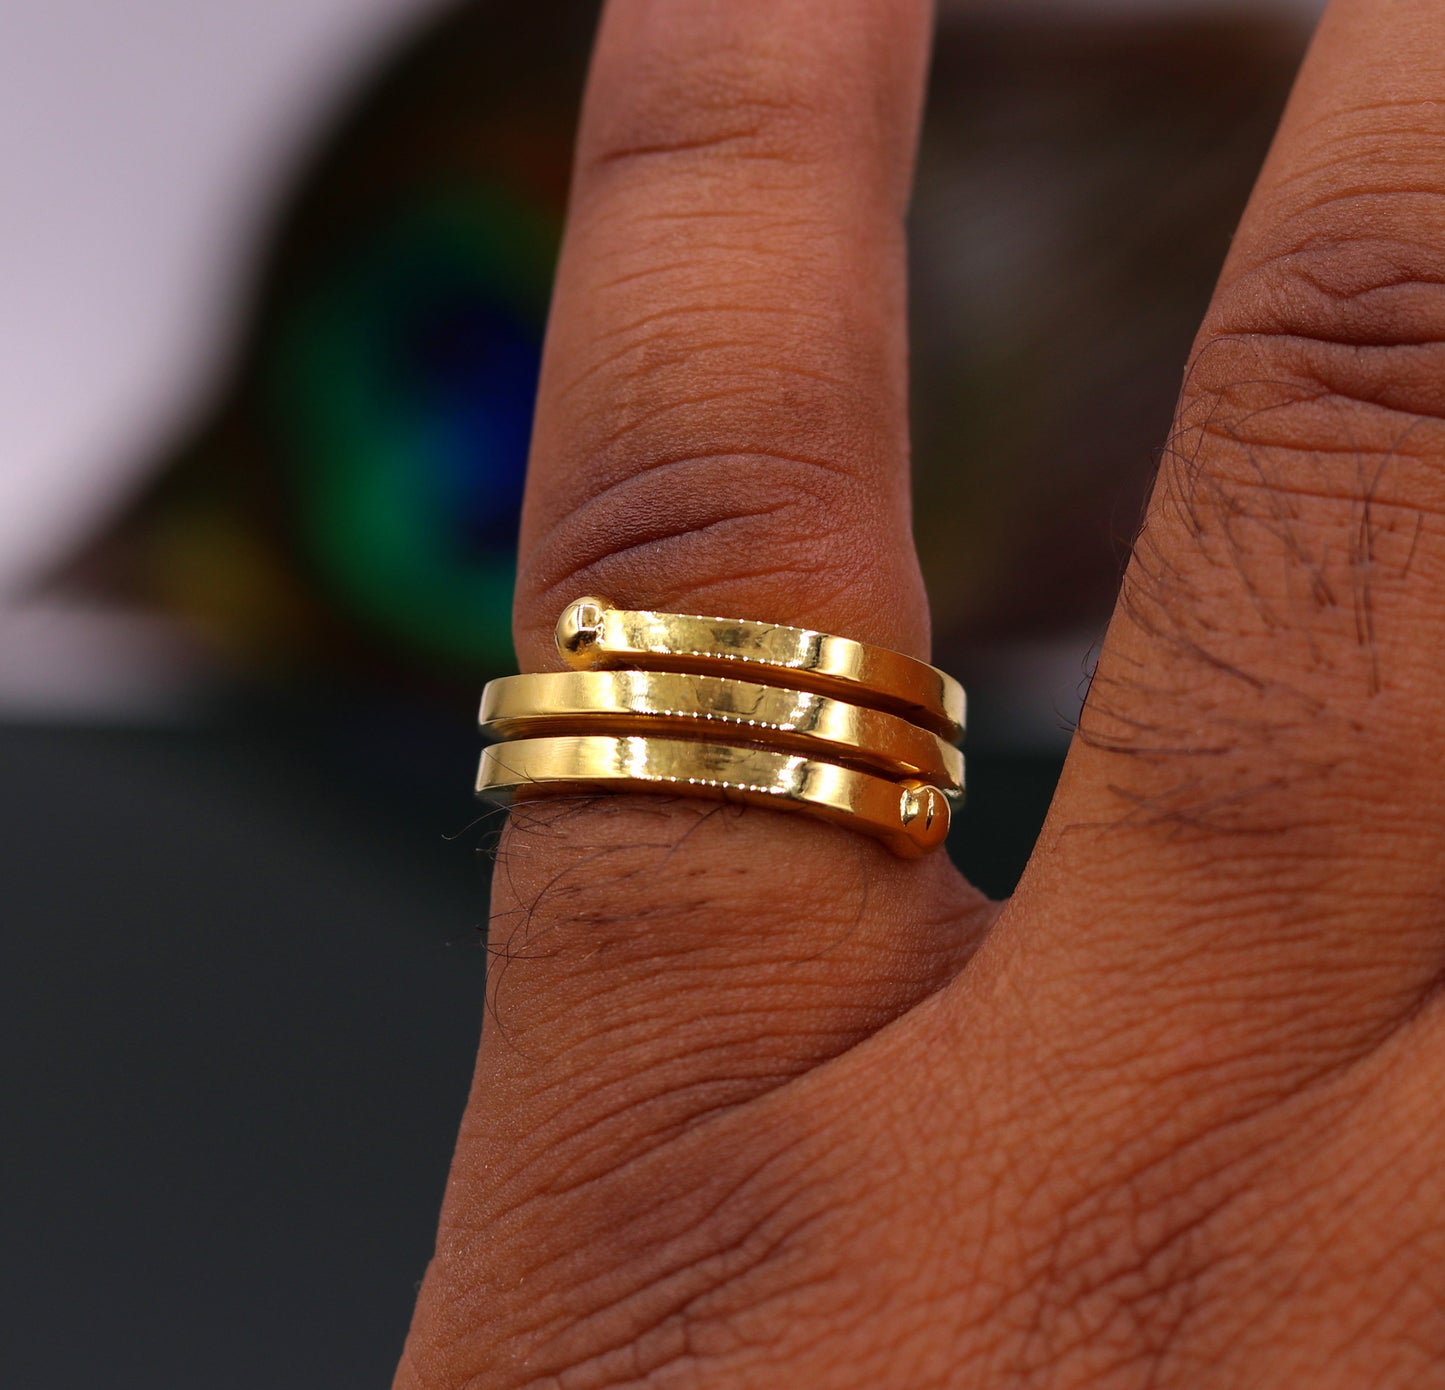 22kt yellow gold handmade fabulous spiral ring vintage antique design all sizes ring band for unisex gifting jewelry from india - TRIBAL ORNAMENTS